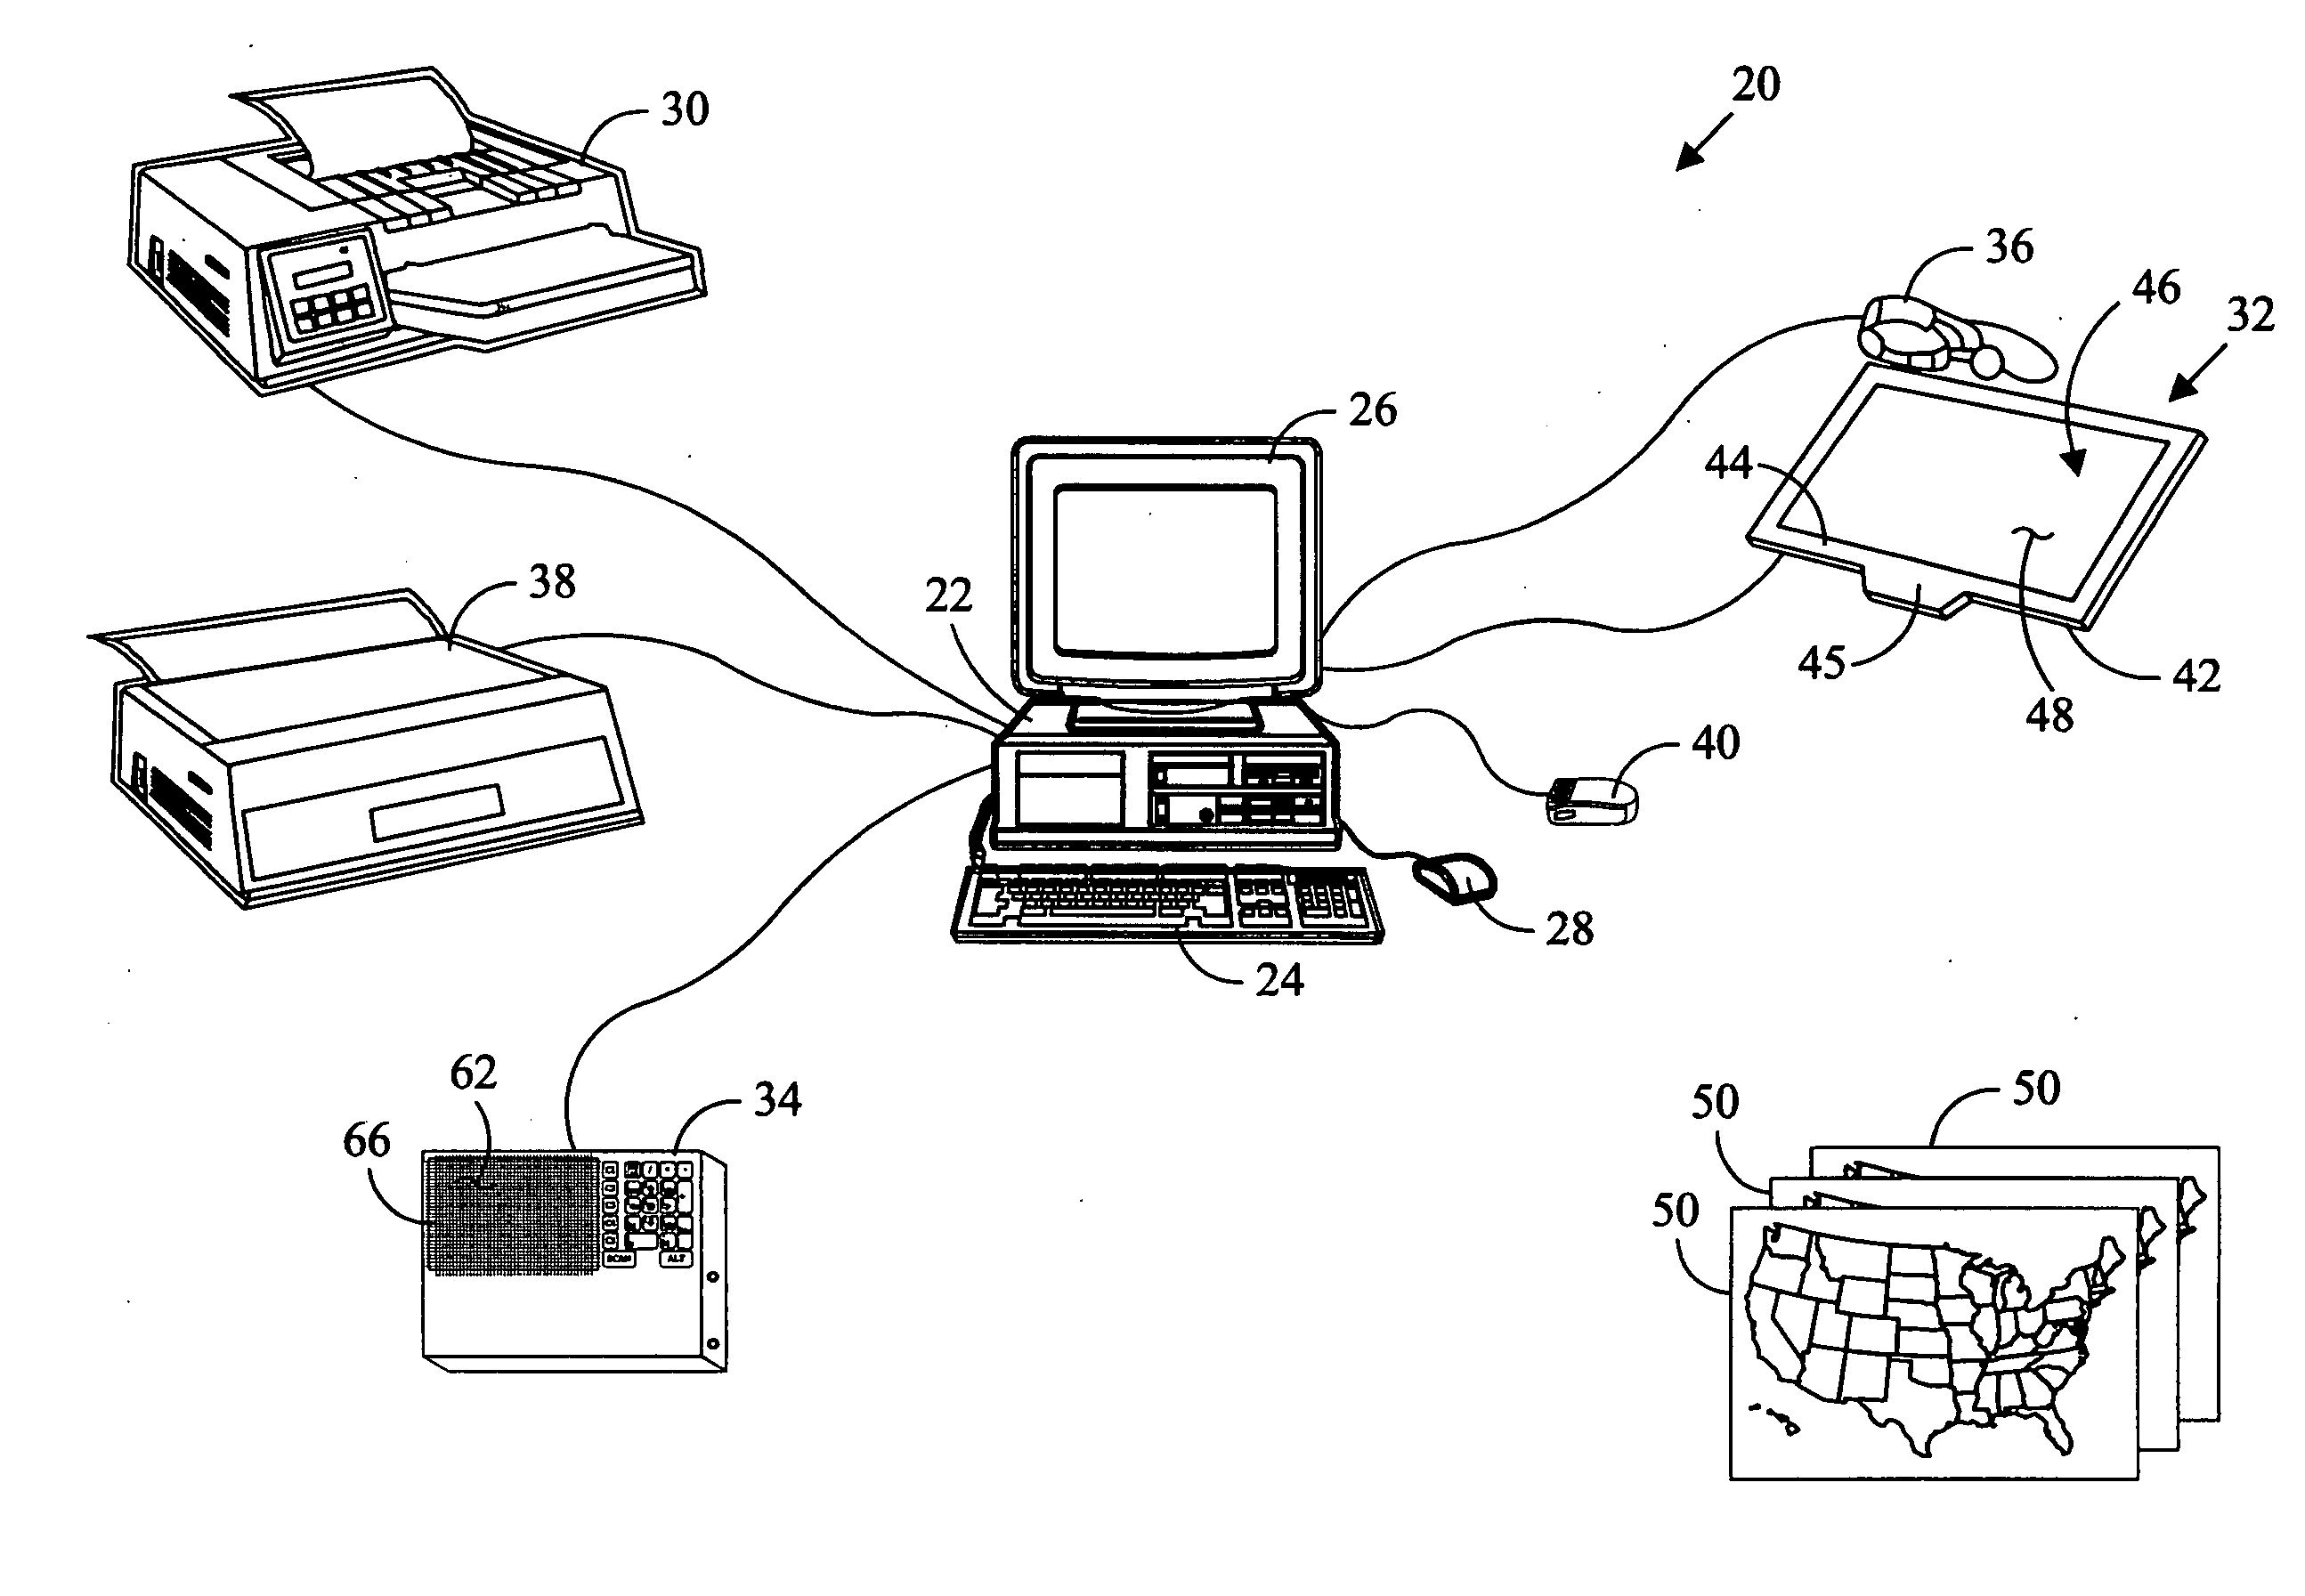 Accessible computer system